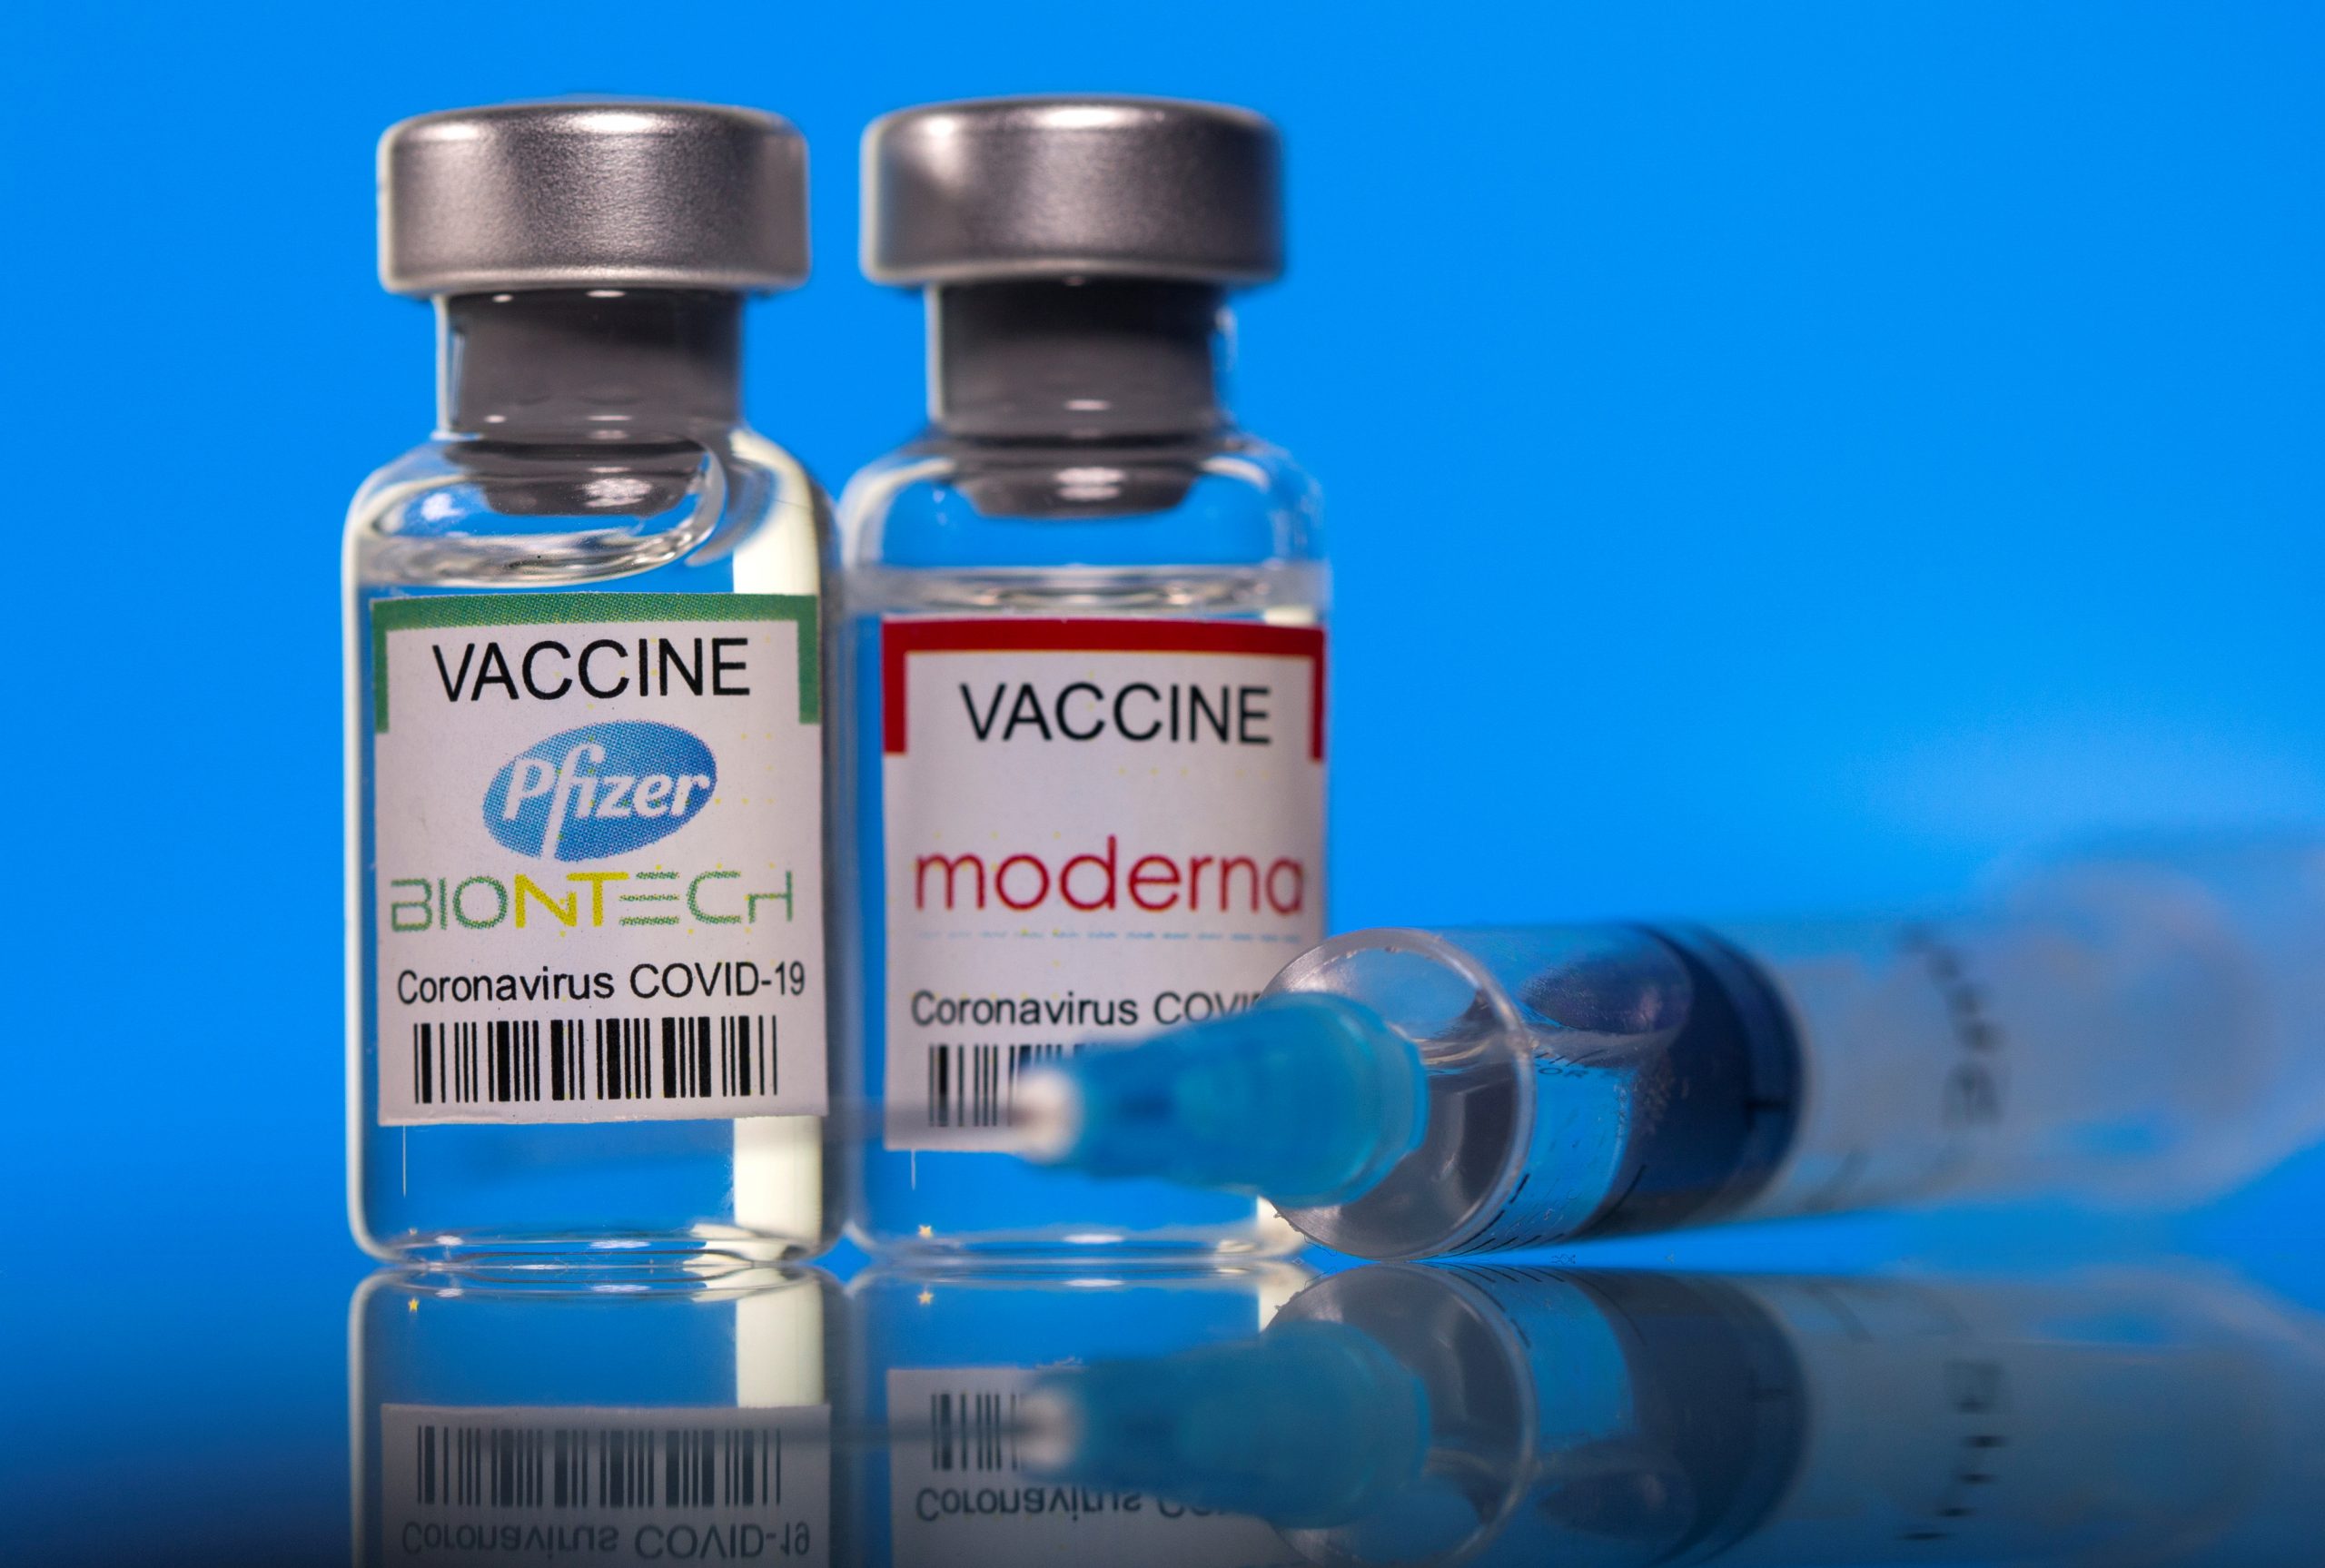 covid-vaccines-more-likely-to-put-you-in-hospital-than-keep-you-out,-bmj-editor’s-analysis-of-pfizer-and-moderna-trial-data-finds